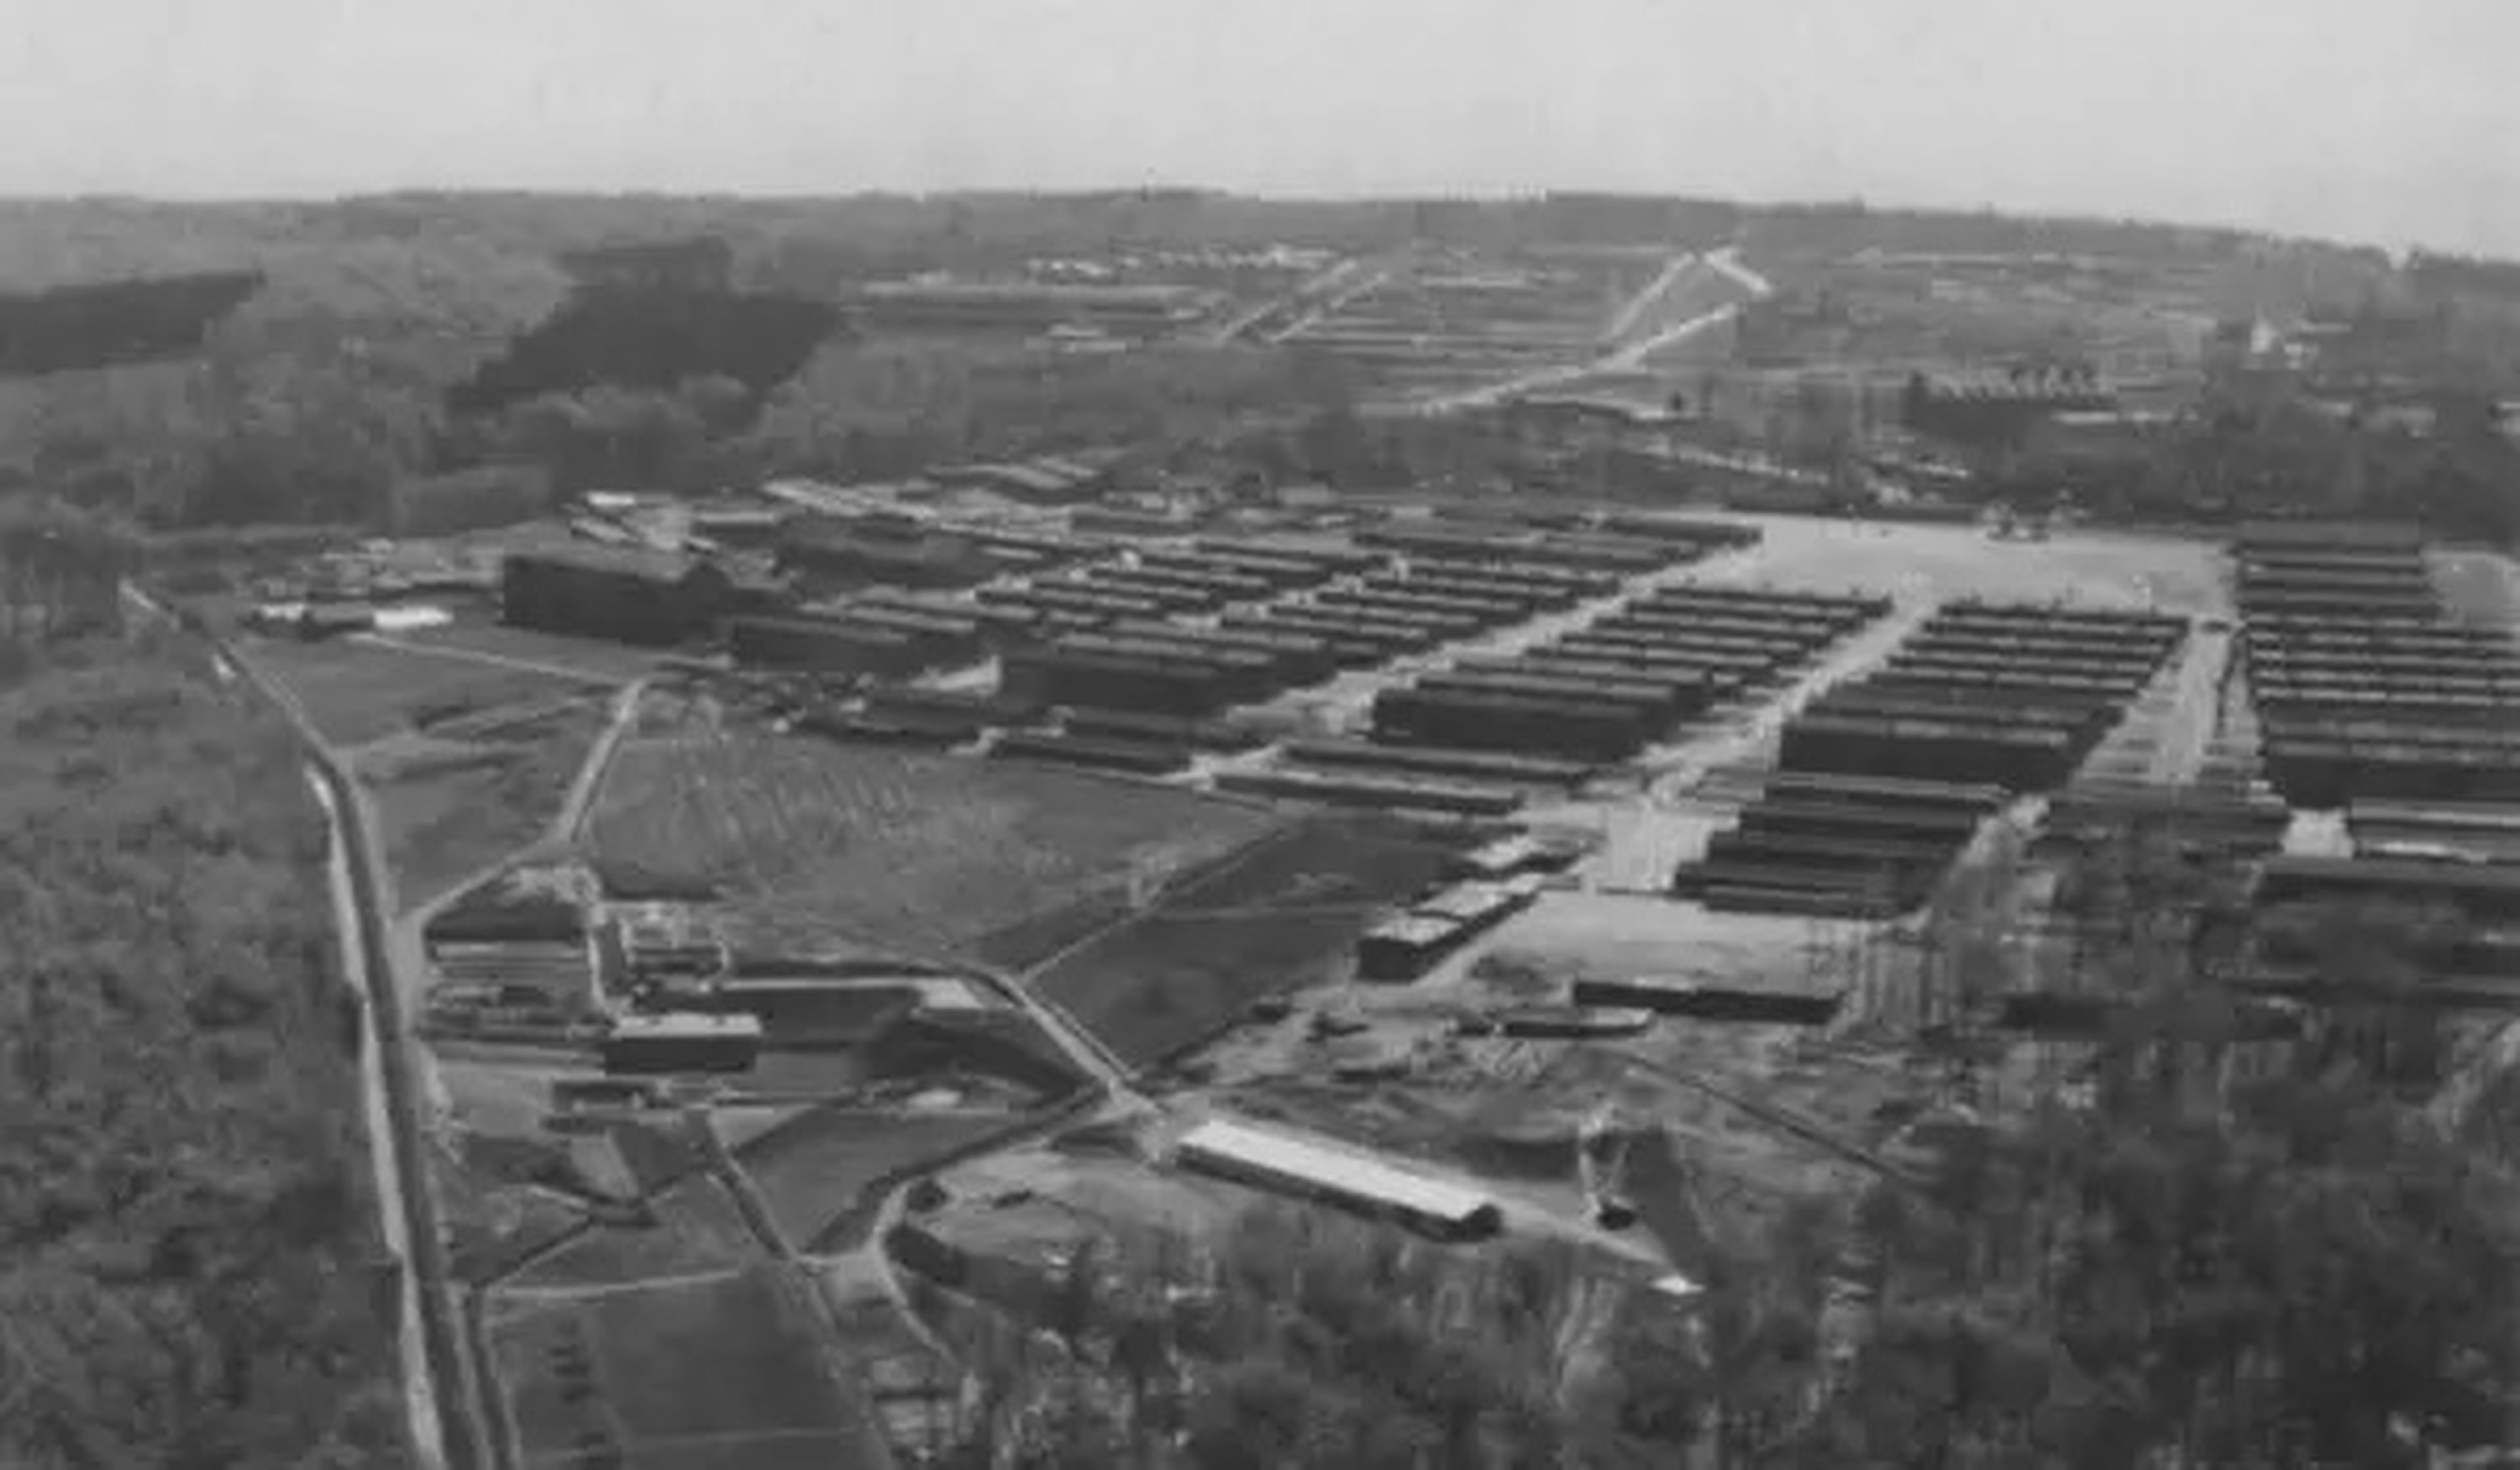 An aerial image of Buchenwald concentration camp seen in 1945.